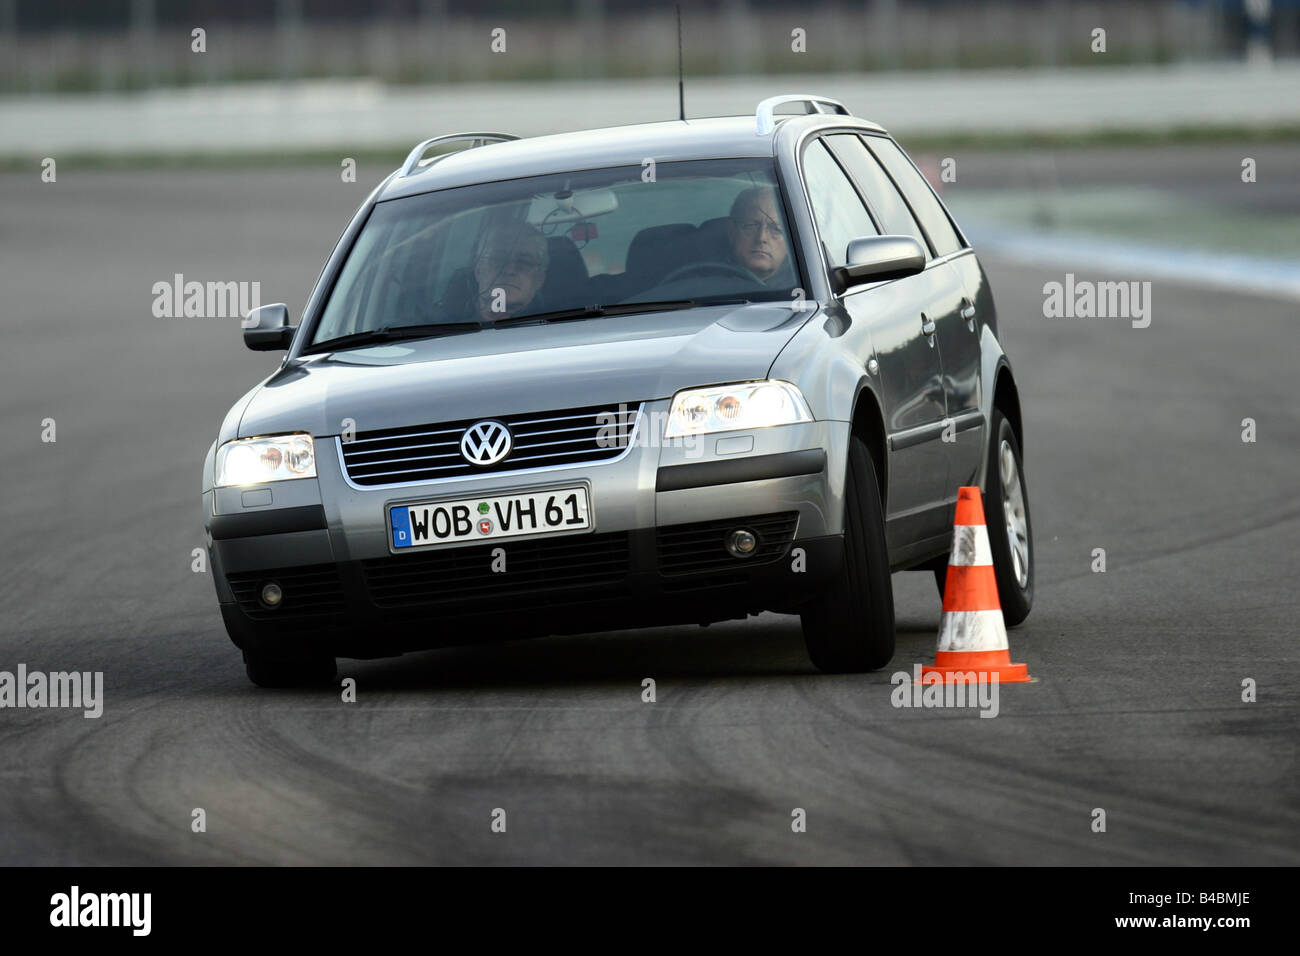 Car, VW Volkswagen Passat Variant 1.8 T, medium class, model year 2001-,  silver, hatchback, FGHDS, driving, diagonal from the fr Stock Photo - Alamy